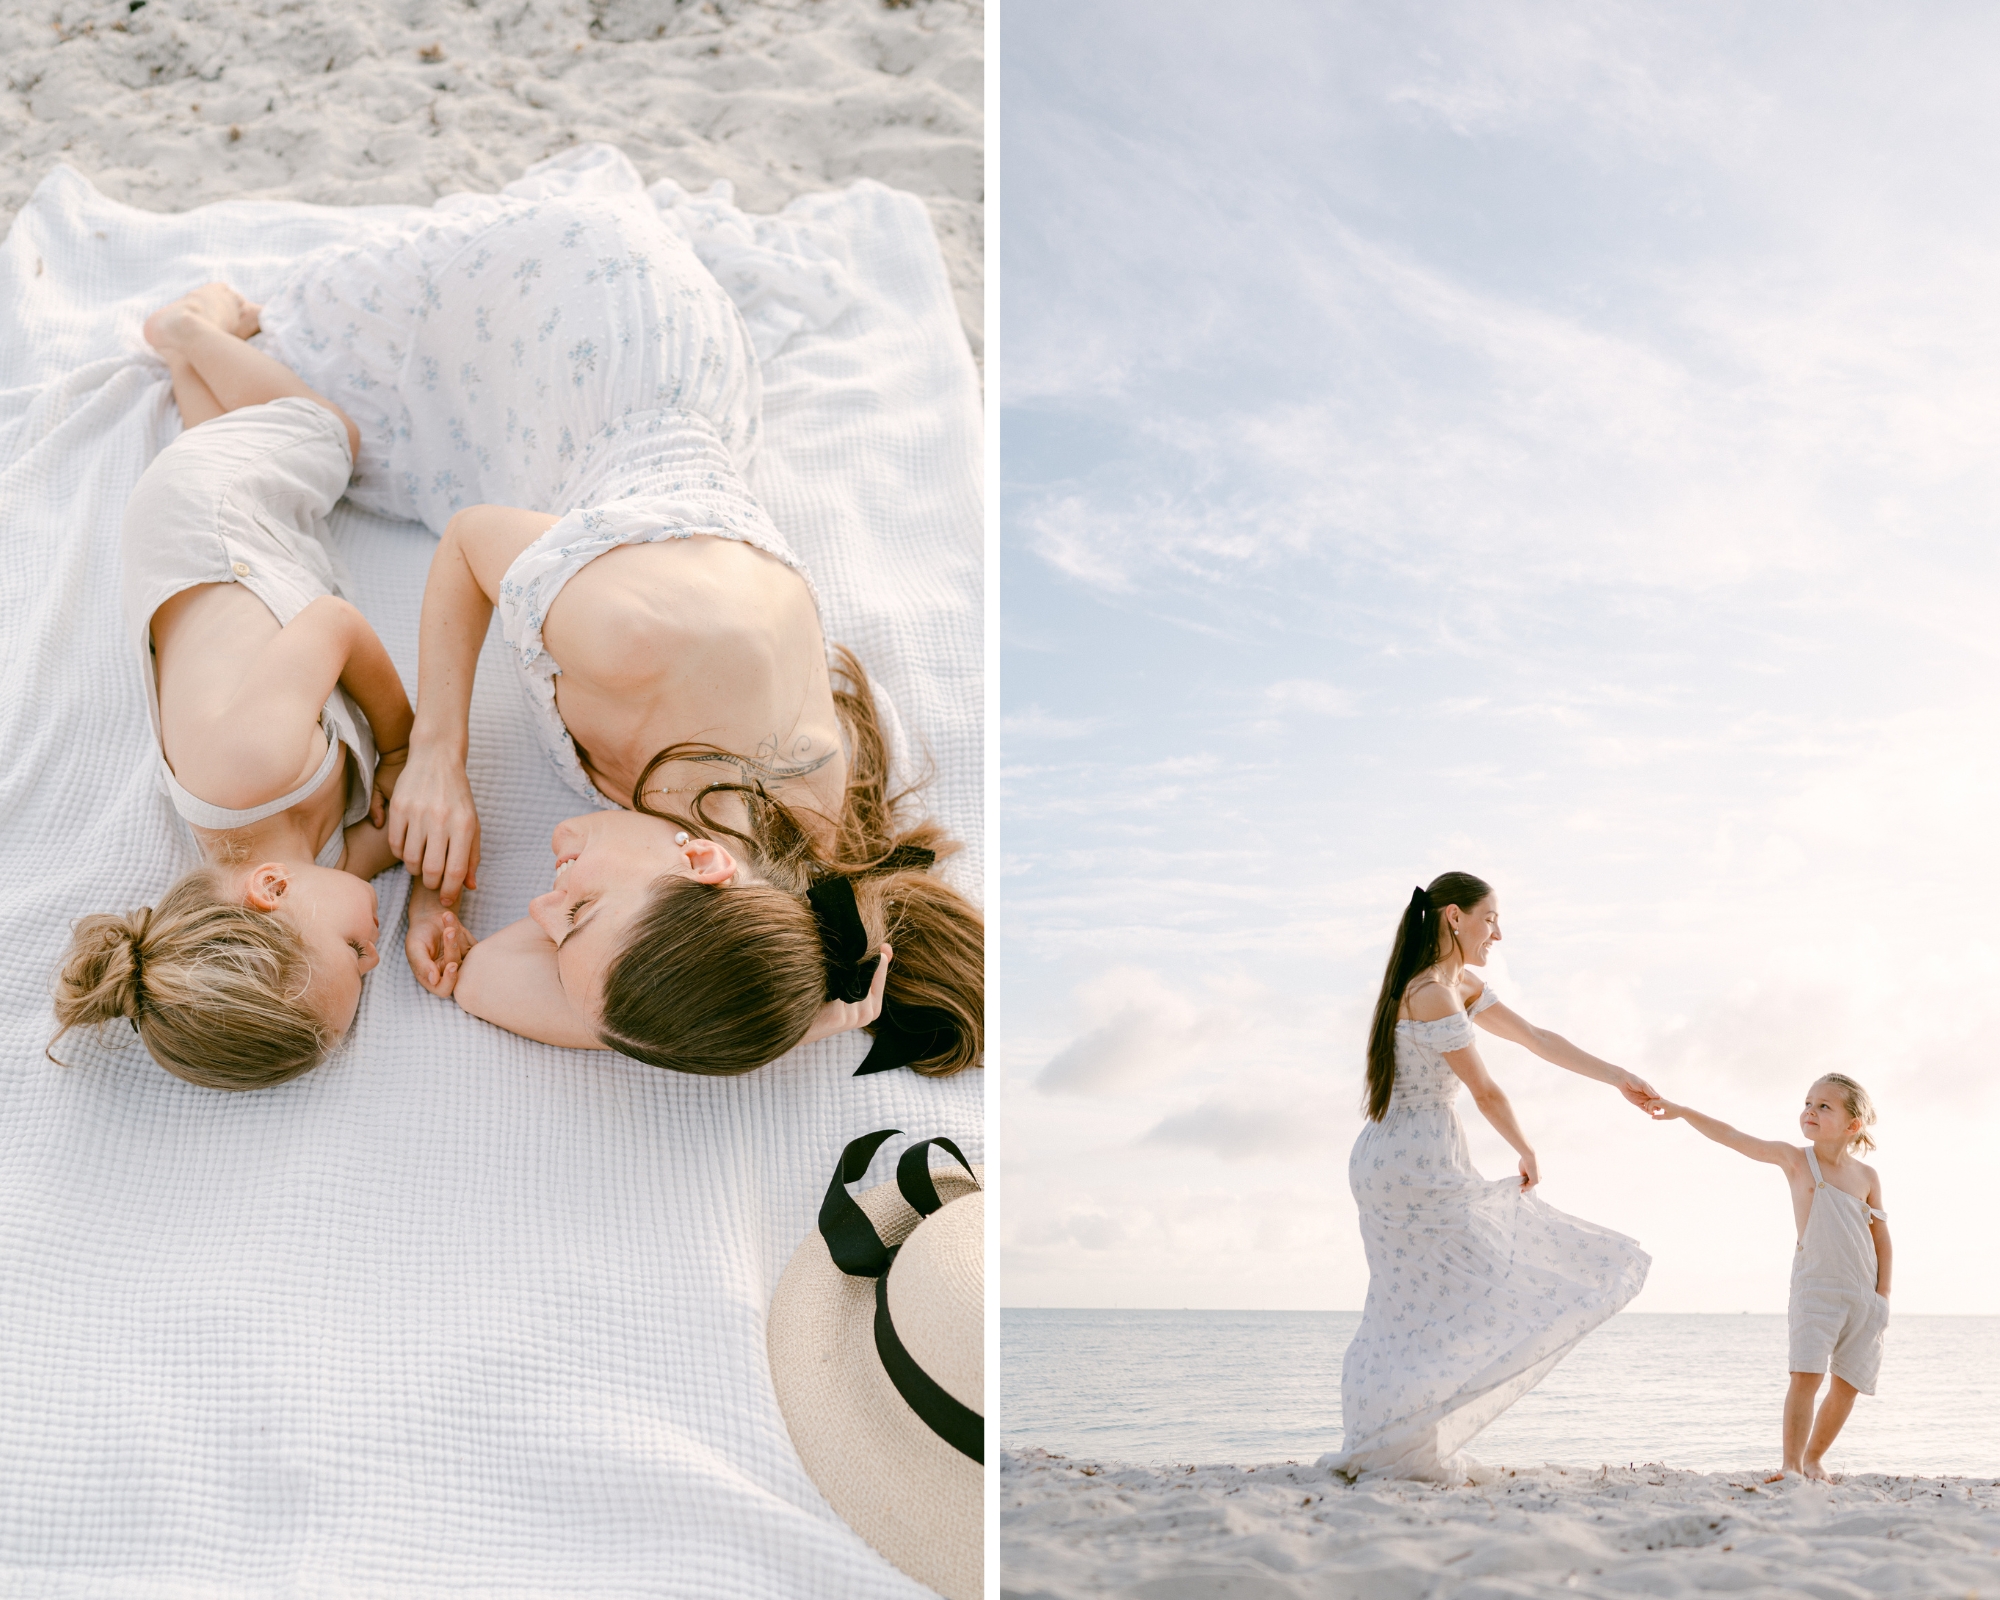 3 reasons to book a Key Biscayne Photographer